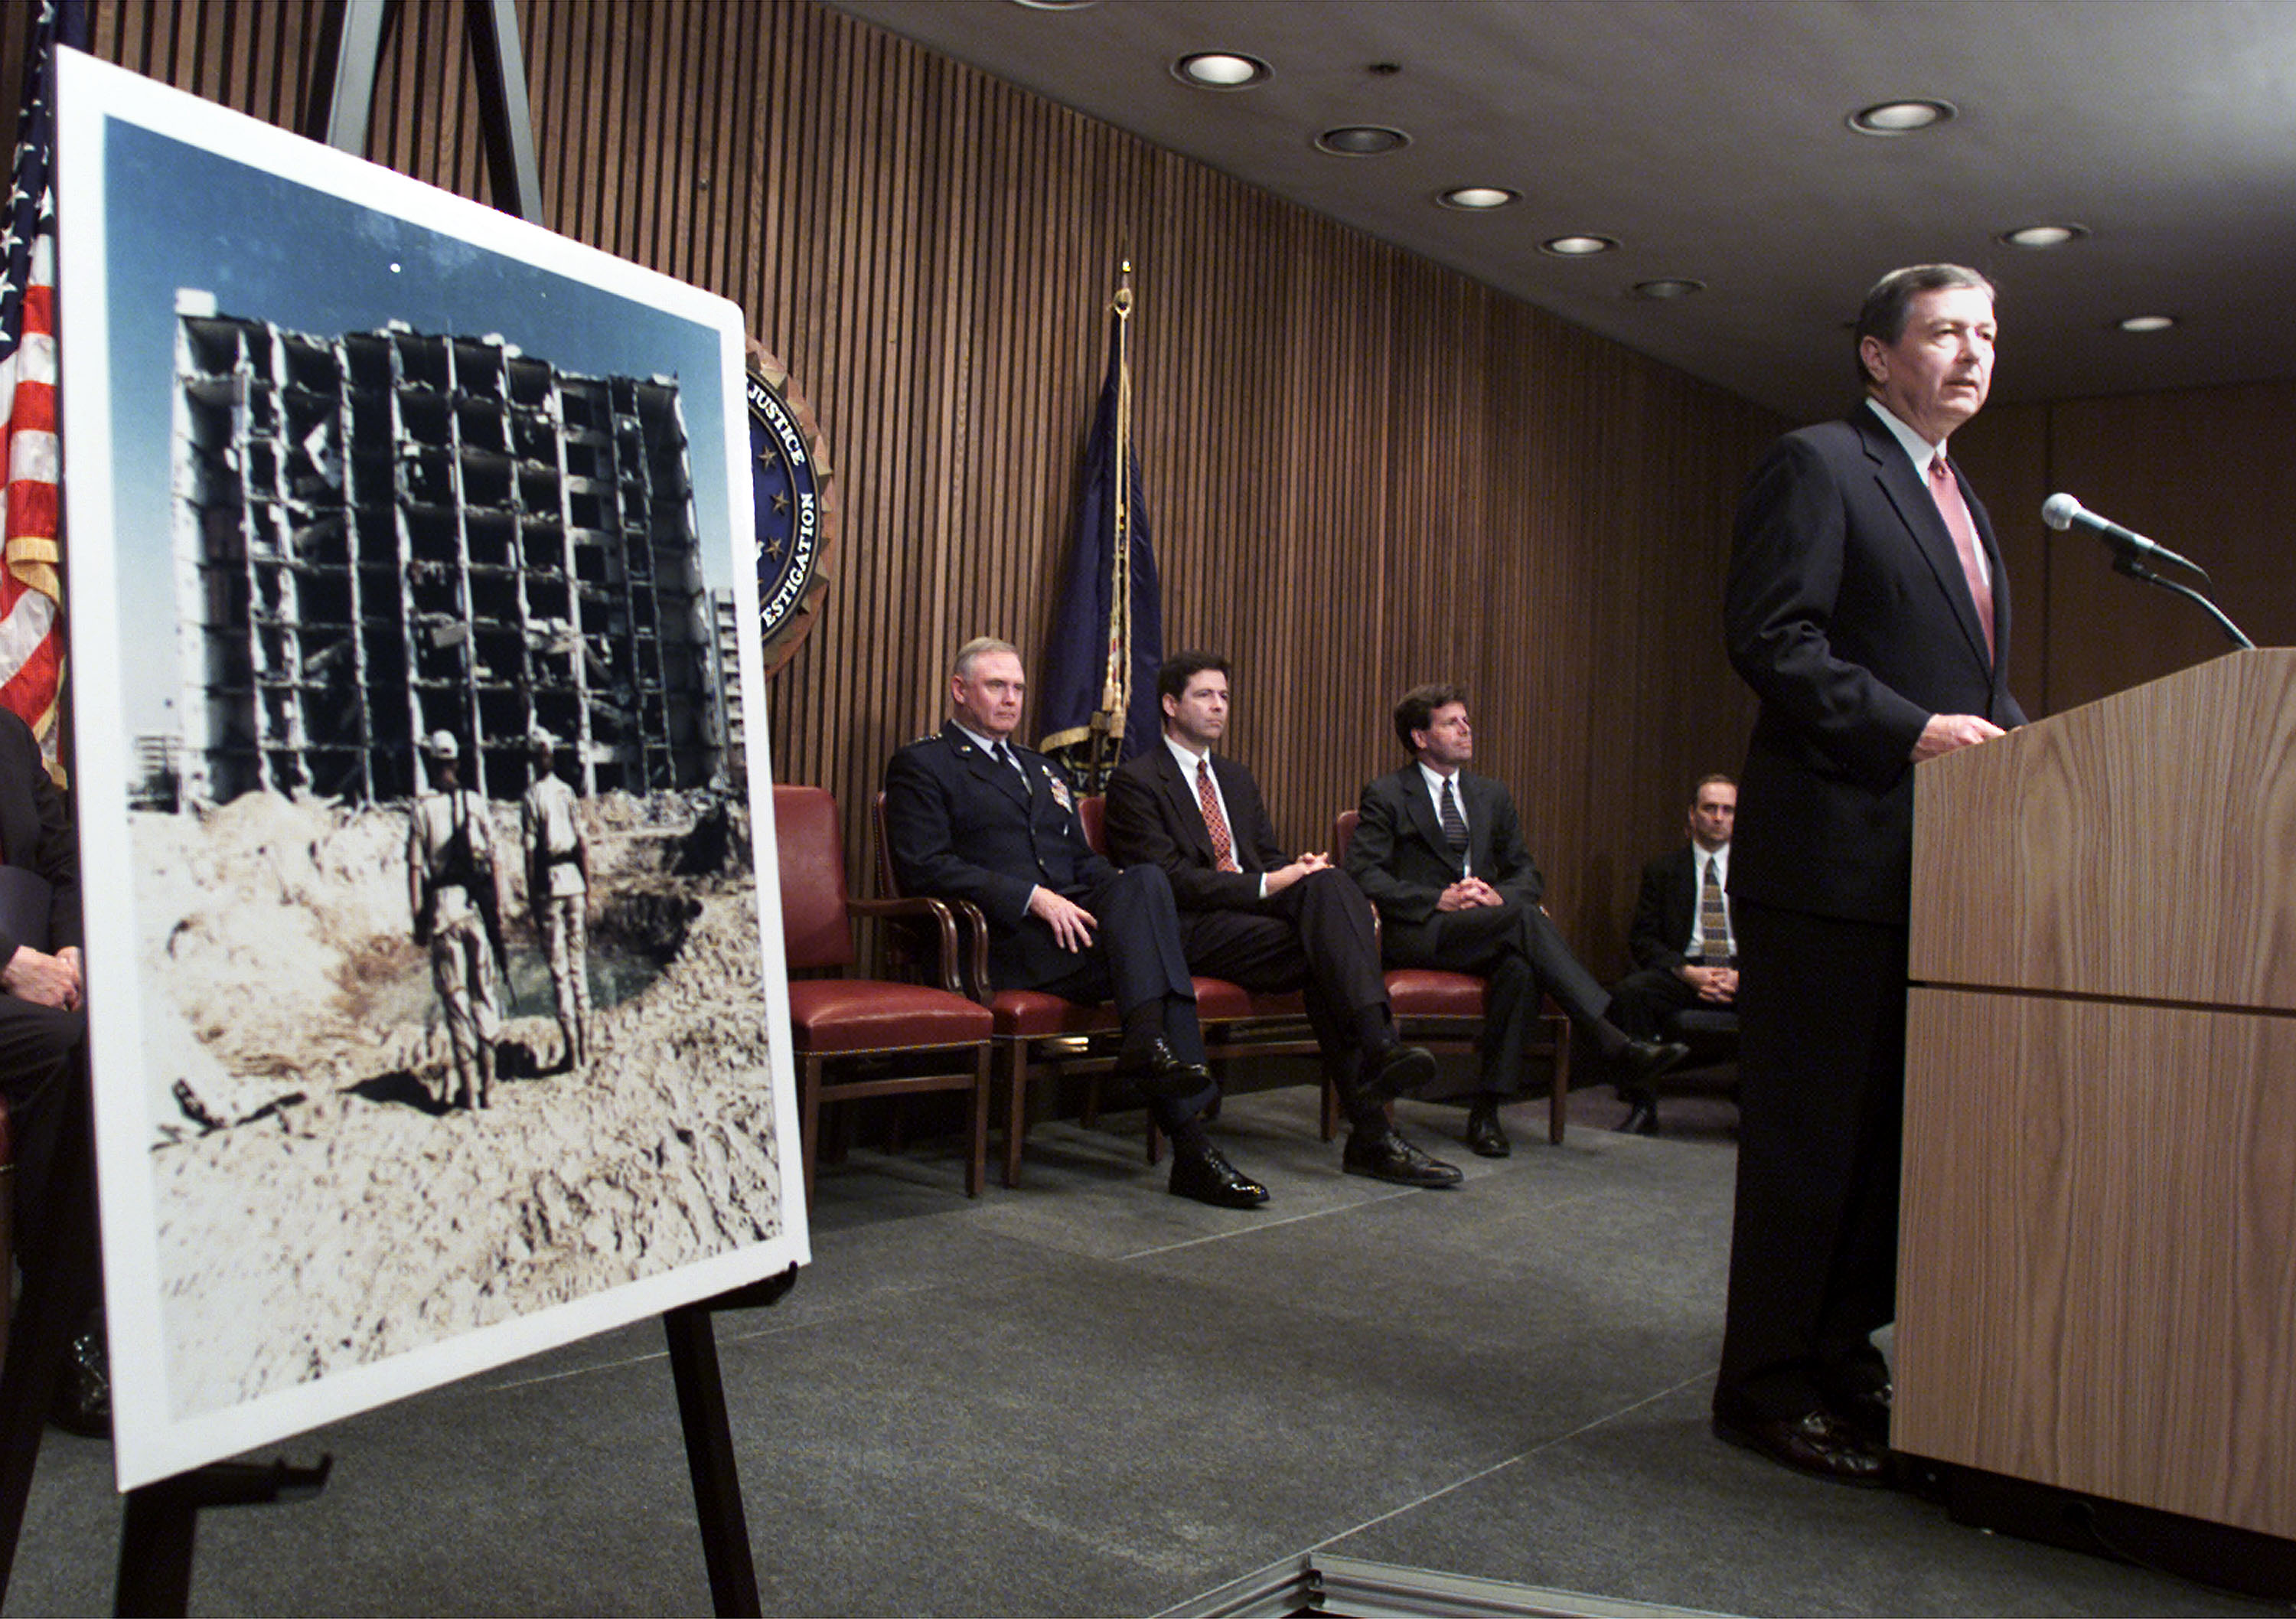 Photo above: Attorney Genaral John Ashcroft announces the indictments of 13 Saudis and one Lebanese in connection with the 1996 Khobar Towers bombing that killed 19 American servicemen in Saudi Arabia on June 21, 2001 at the FBI Headquarters in Washington, DC. Photo by Mark Wilson/Getty Images.